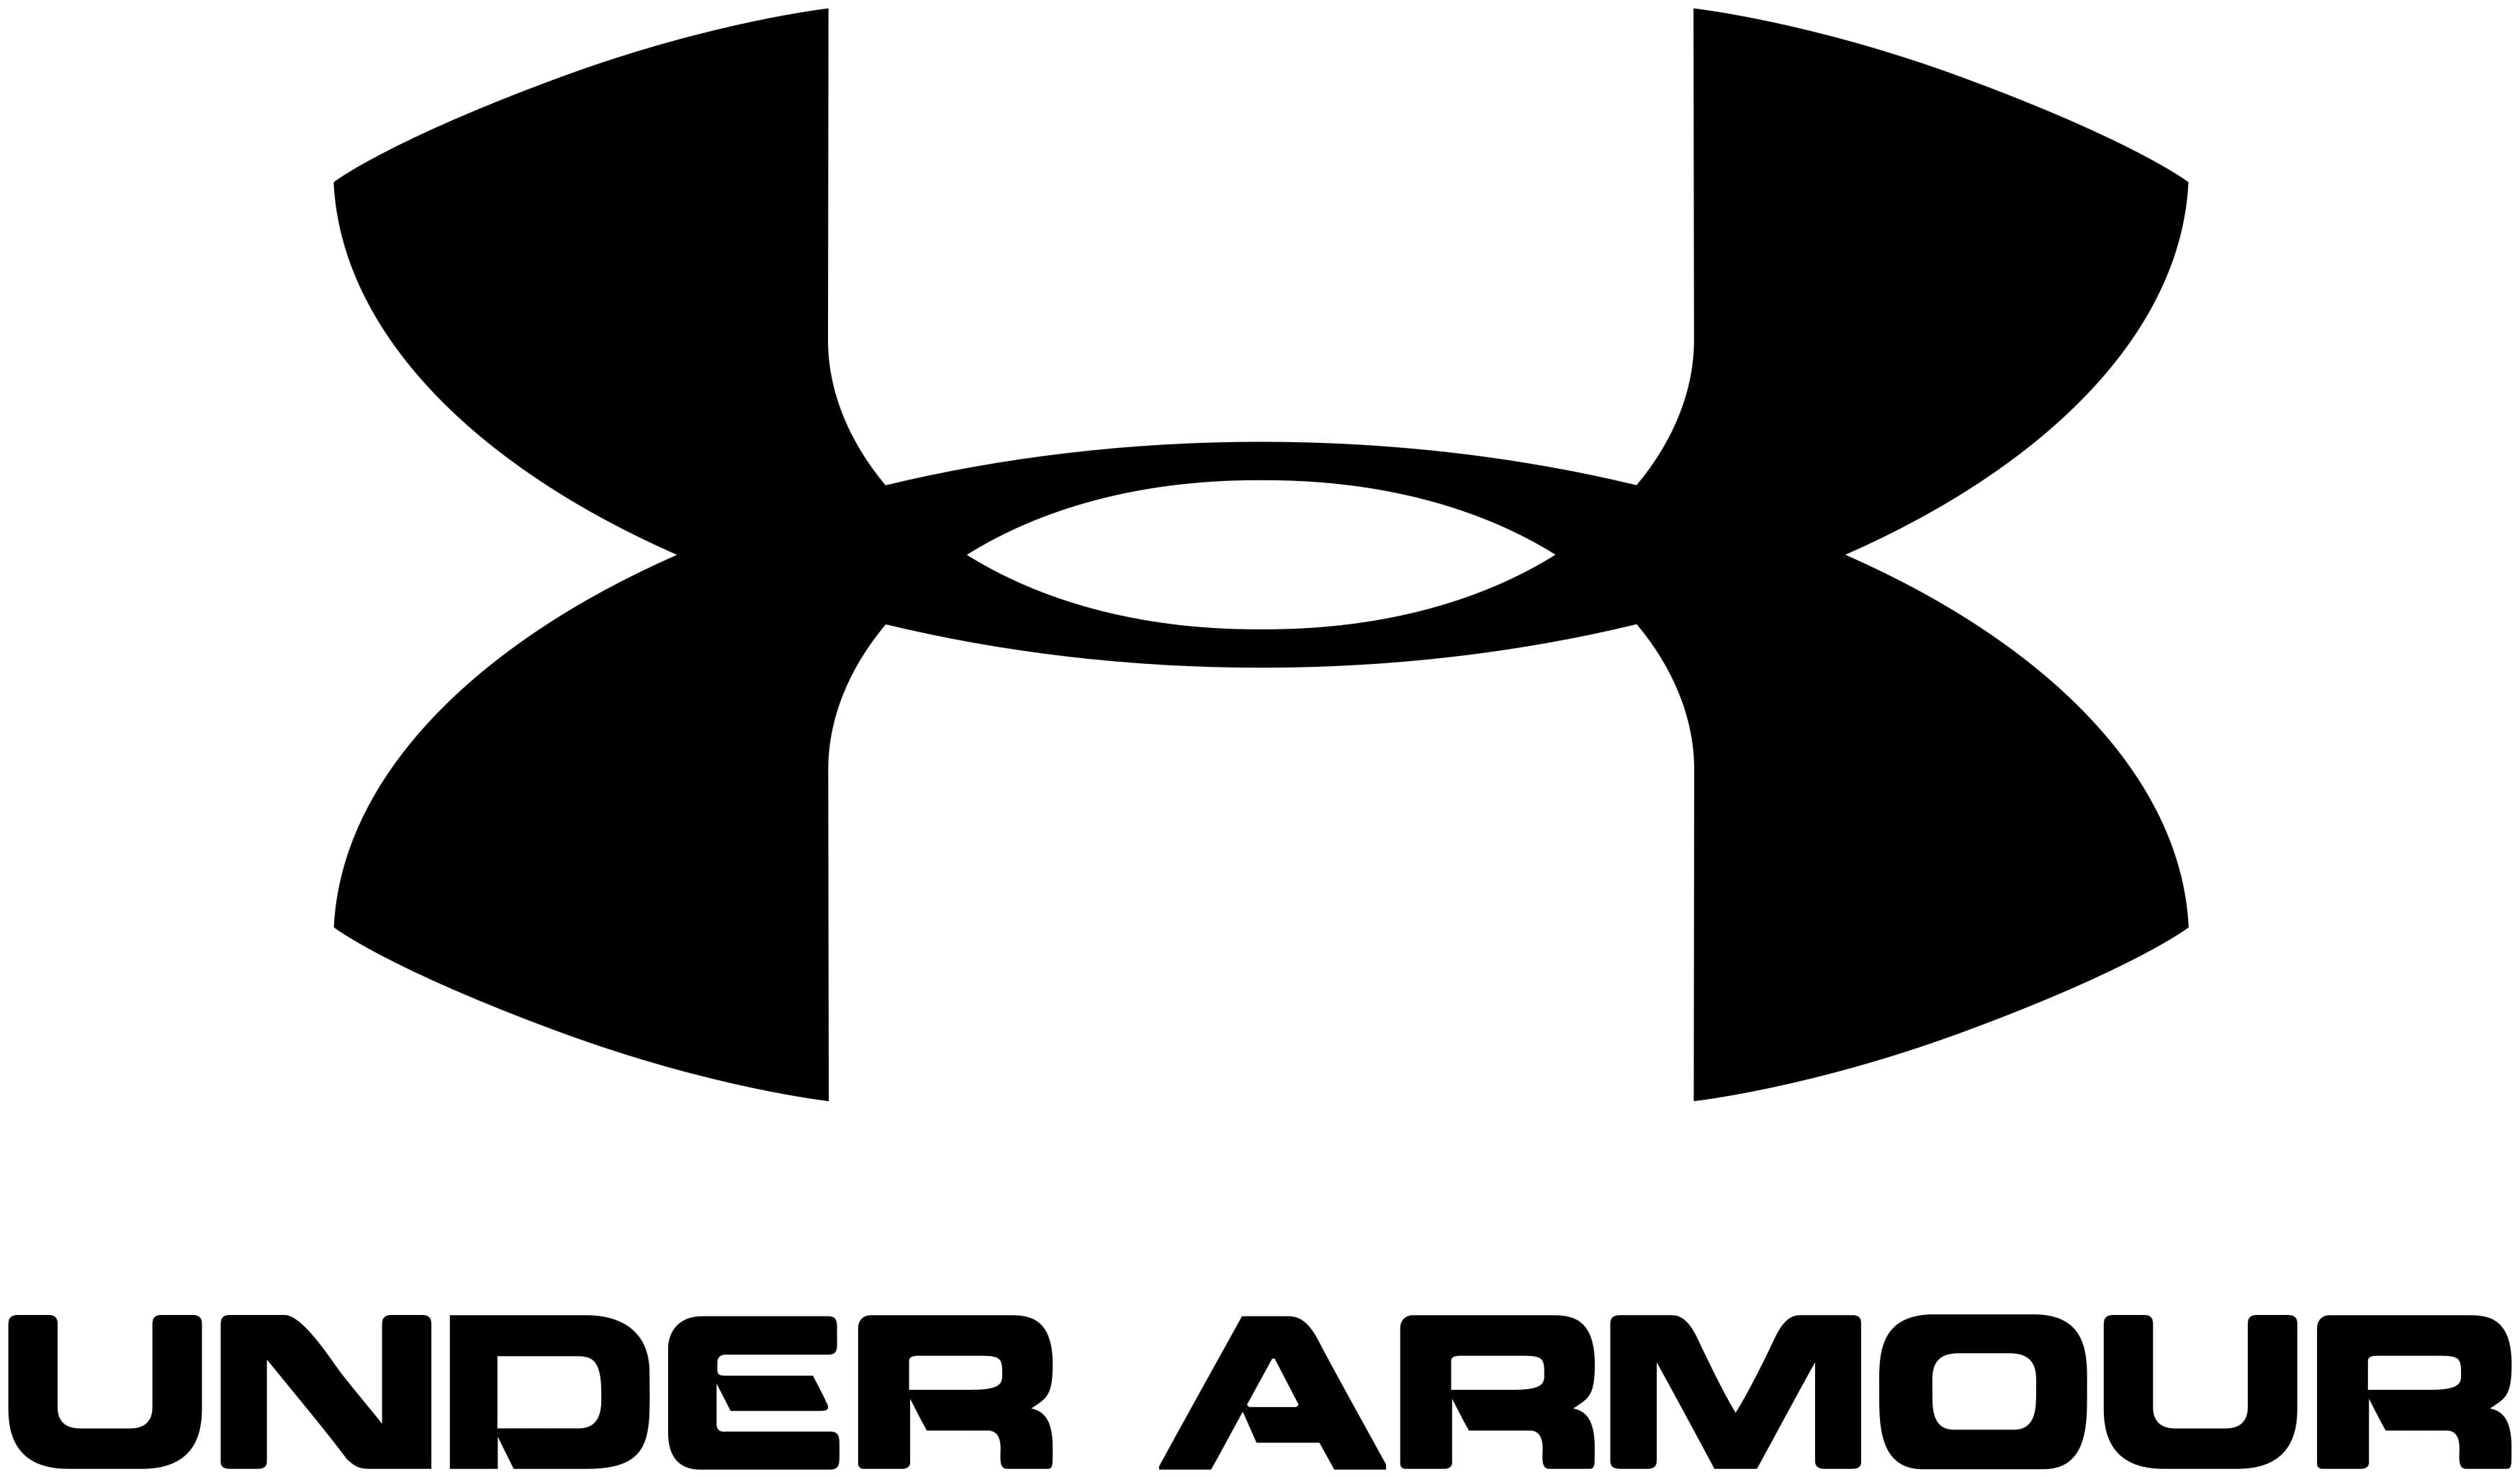 Under Armour and symbol, history, PNG, brand